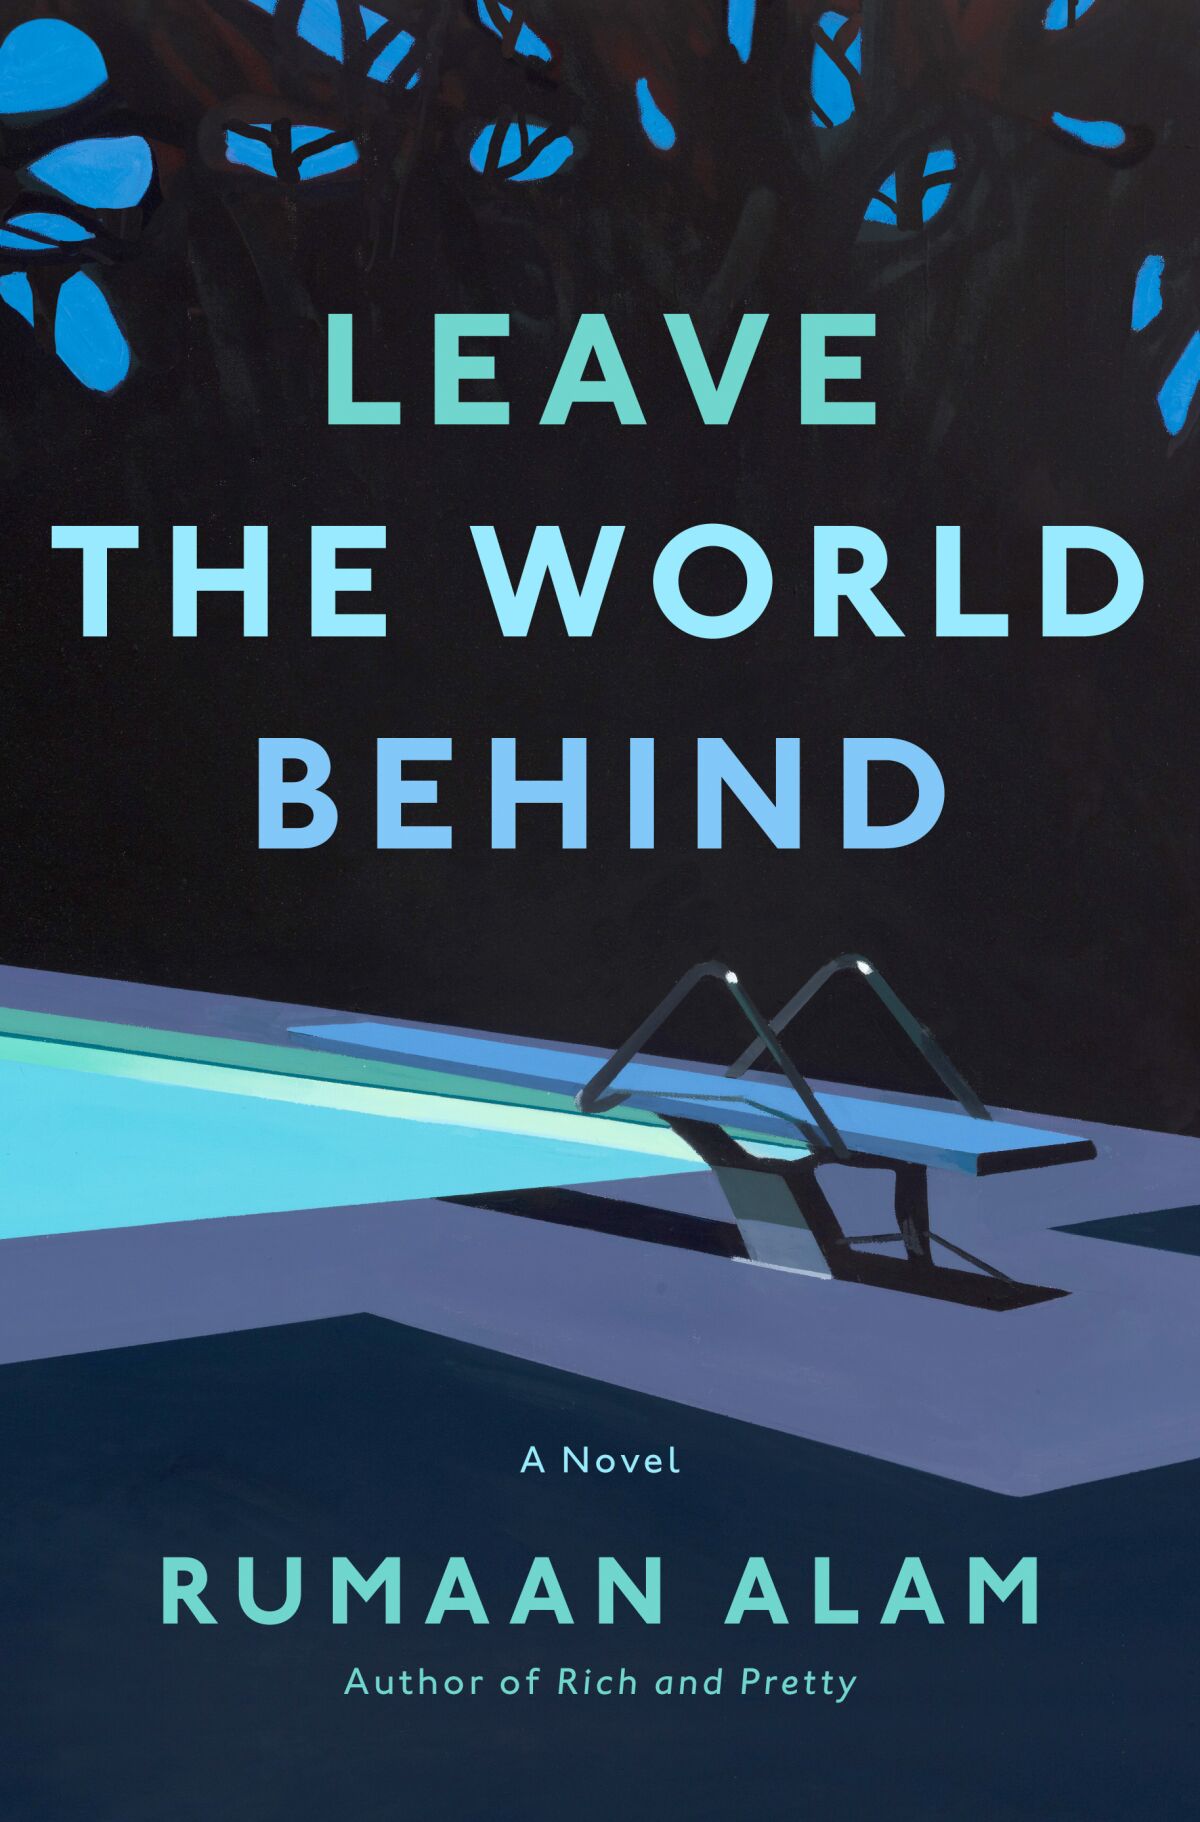 Cover of "Leave the World Behind: A Novel" by Rumaan Alam.